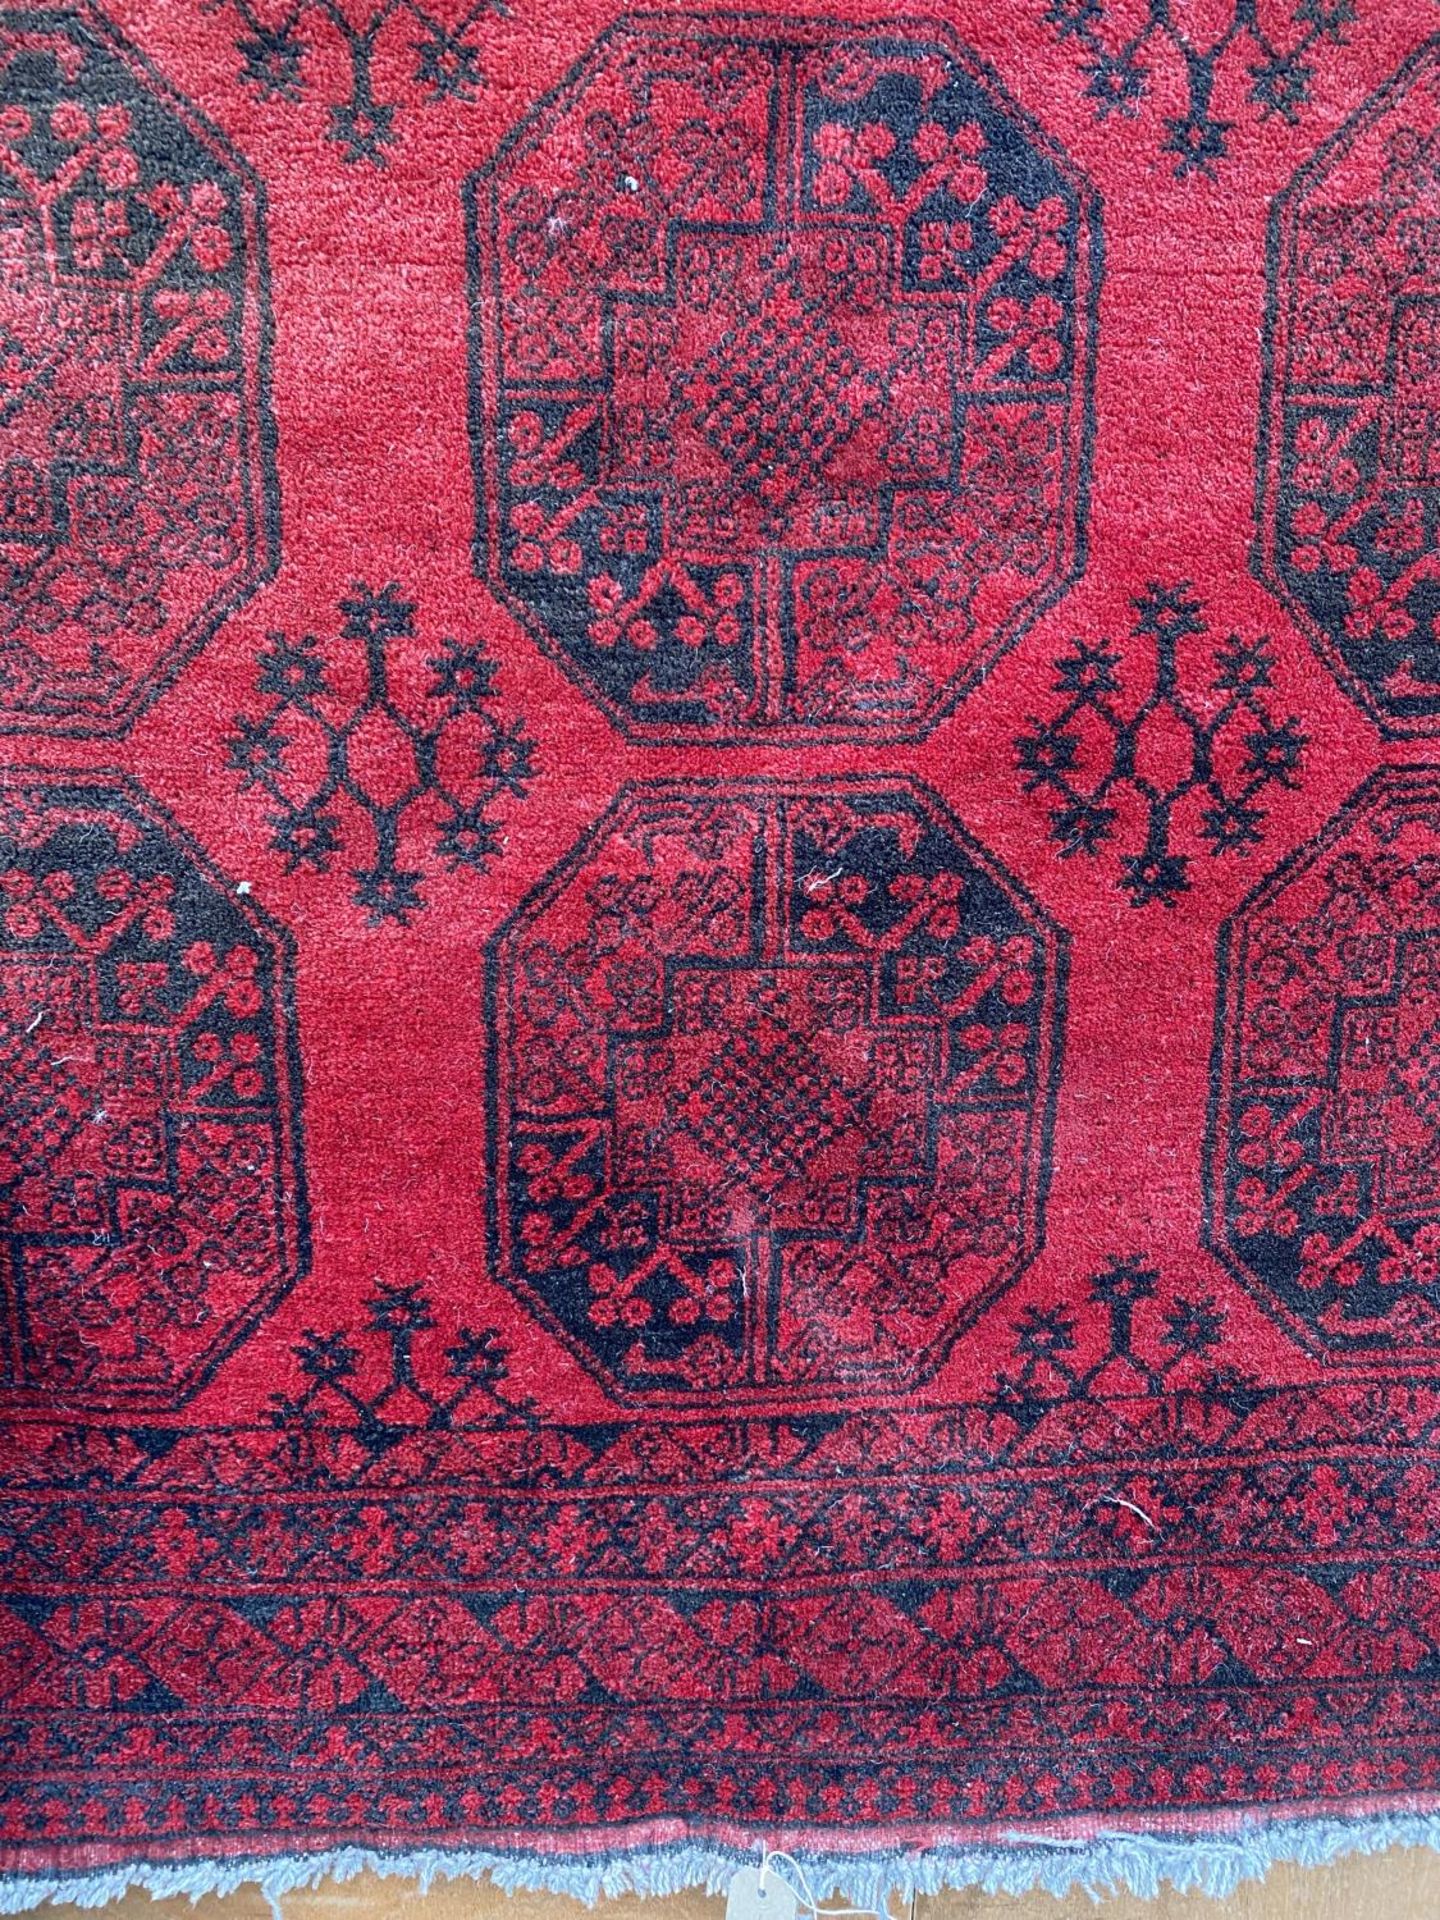 A RED PATTERNED FRINGED RUG (280CM x 209CM) - Image 2 of 3